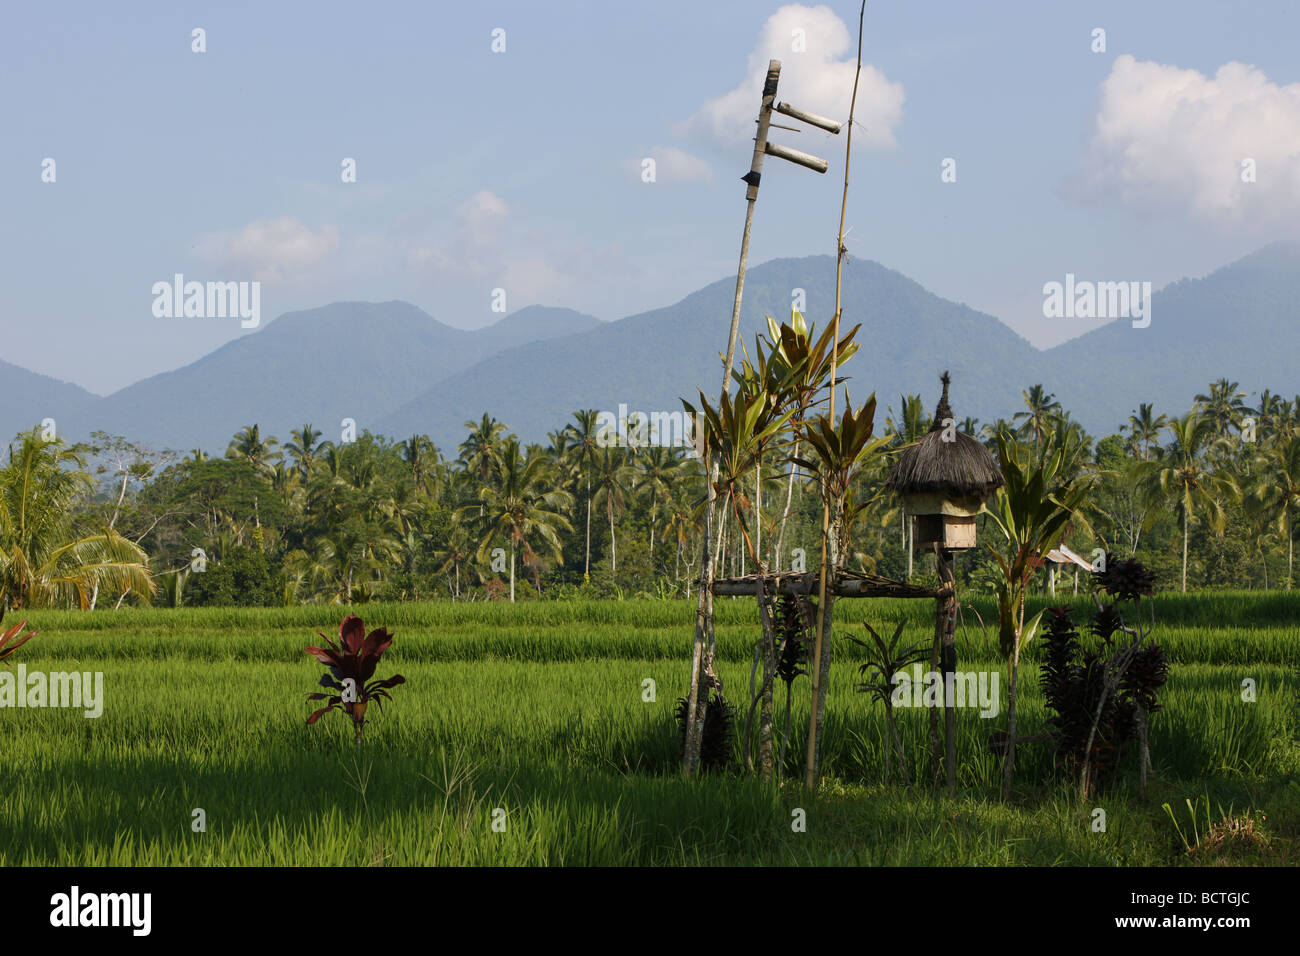 Rice fields, Mount Lesung, volcano, Bali, Republic of Indonesia, Southeast Asia Stock Photo